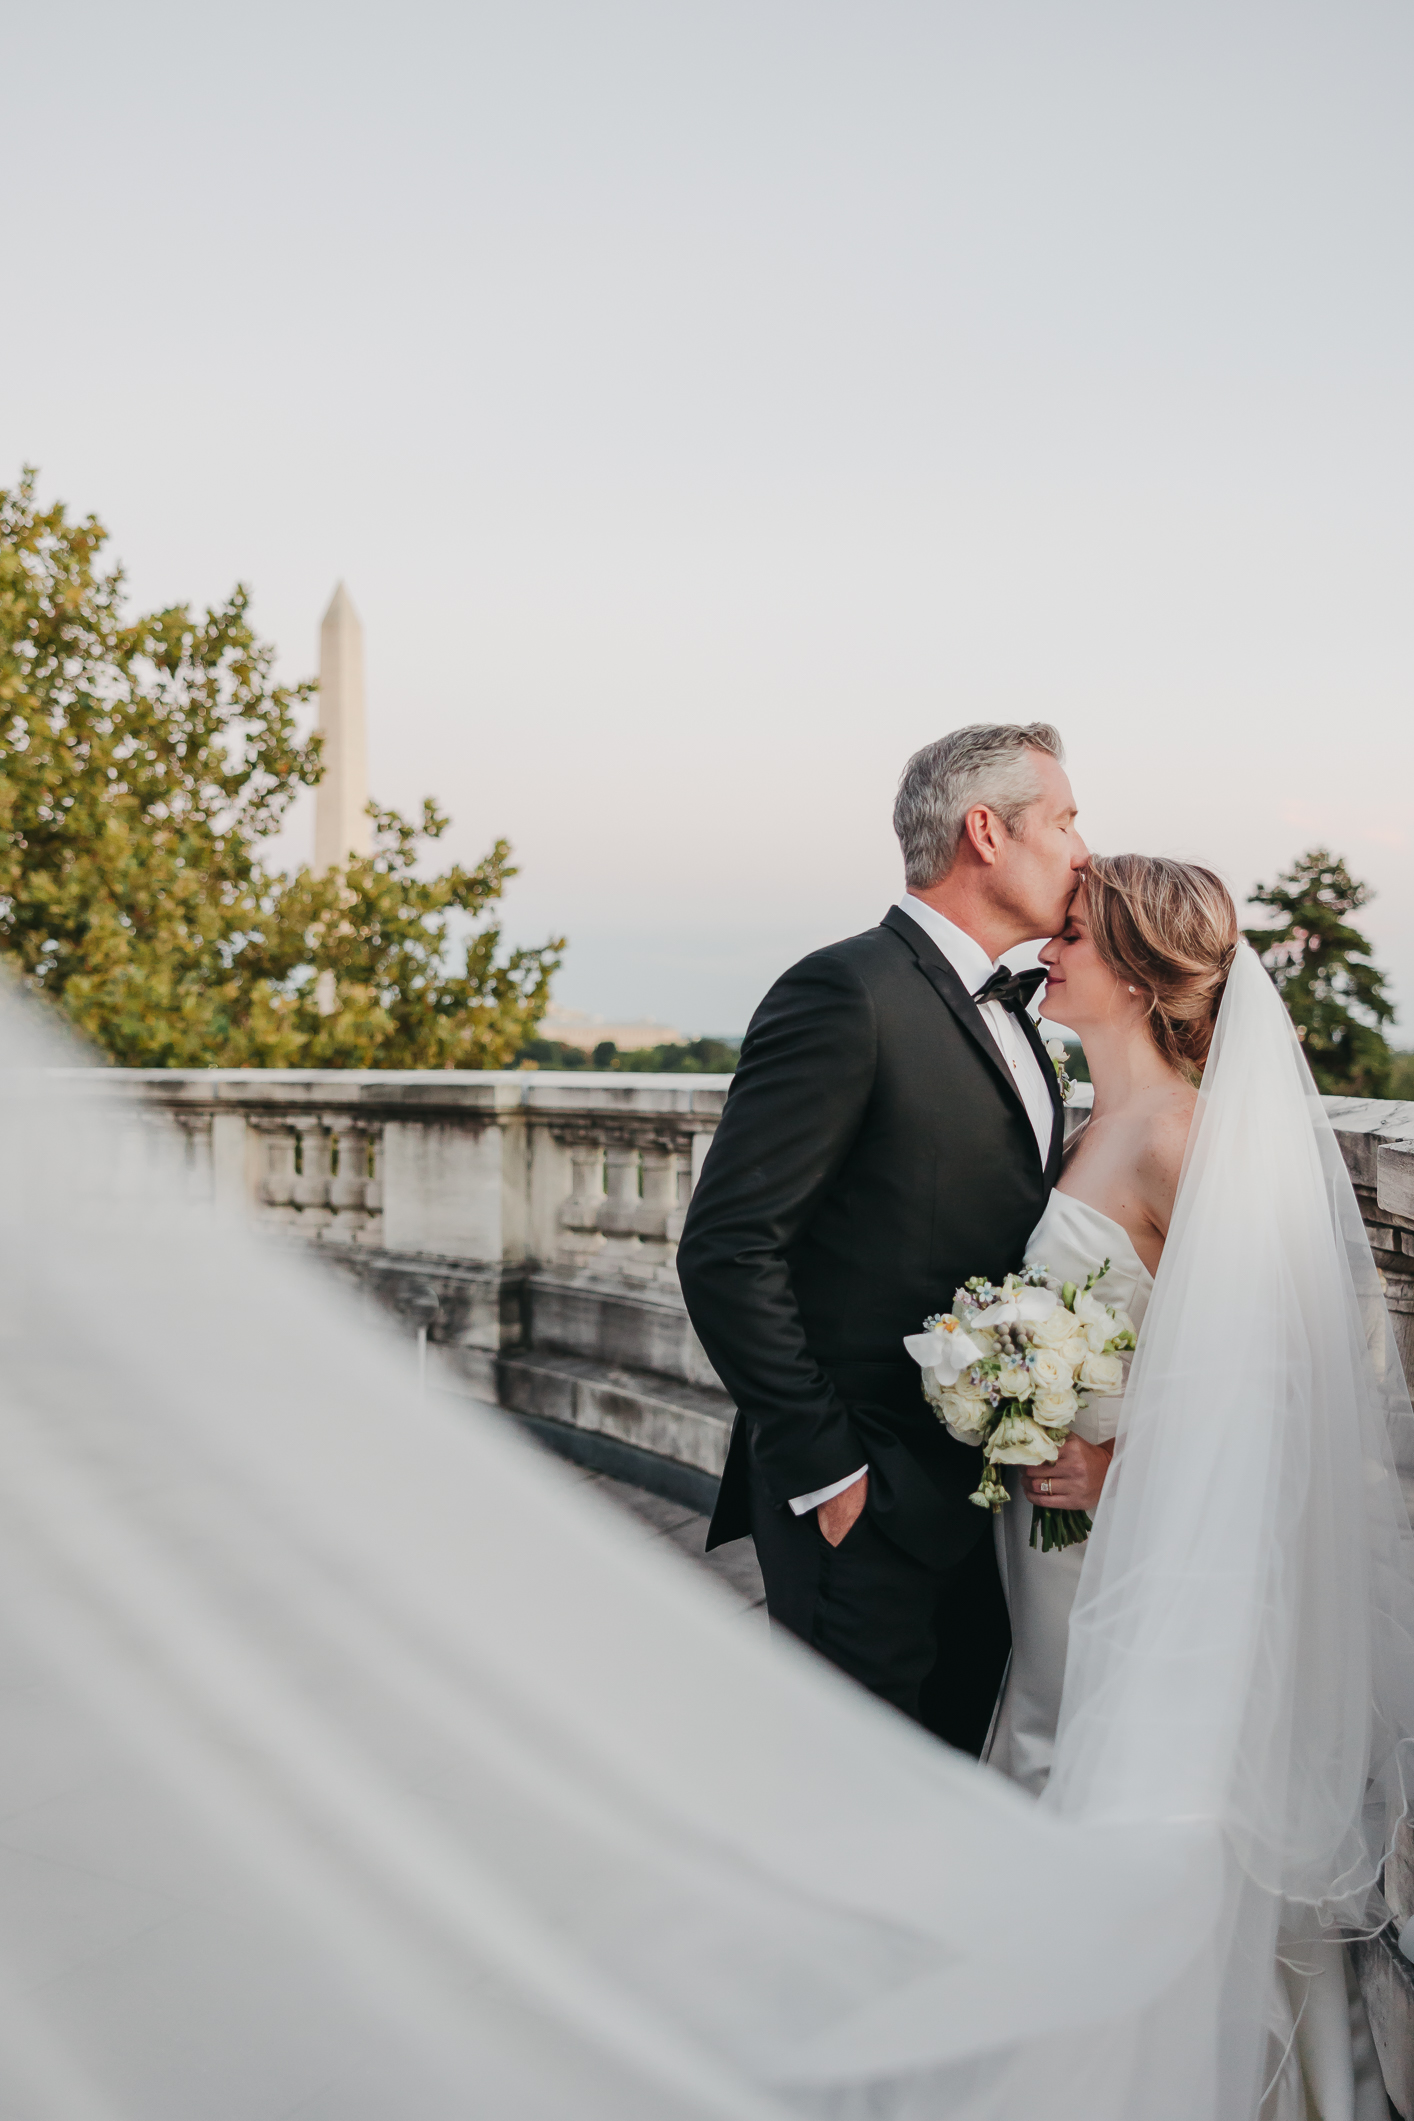 Groom plants a kiss on bride's forehead as her veil sways in the wind, taken by Rachel Yearick Photography